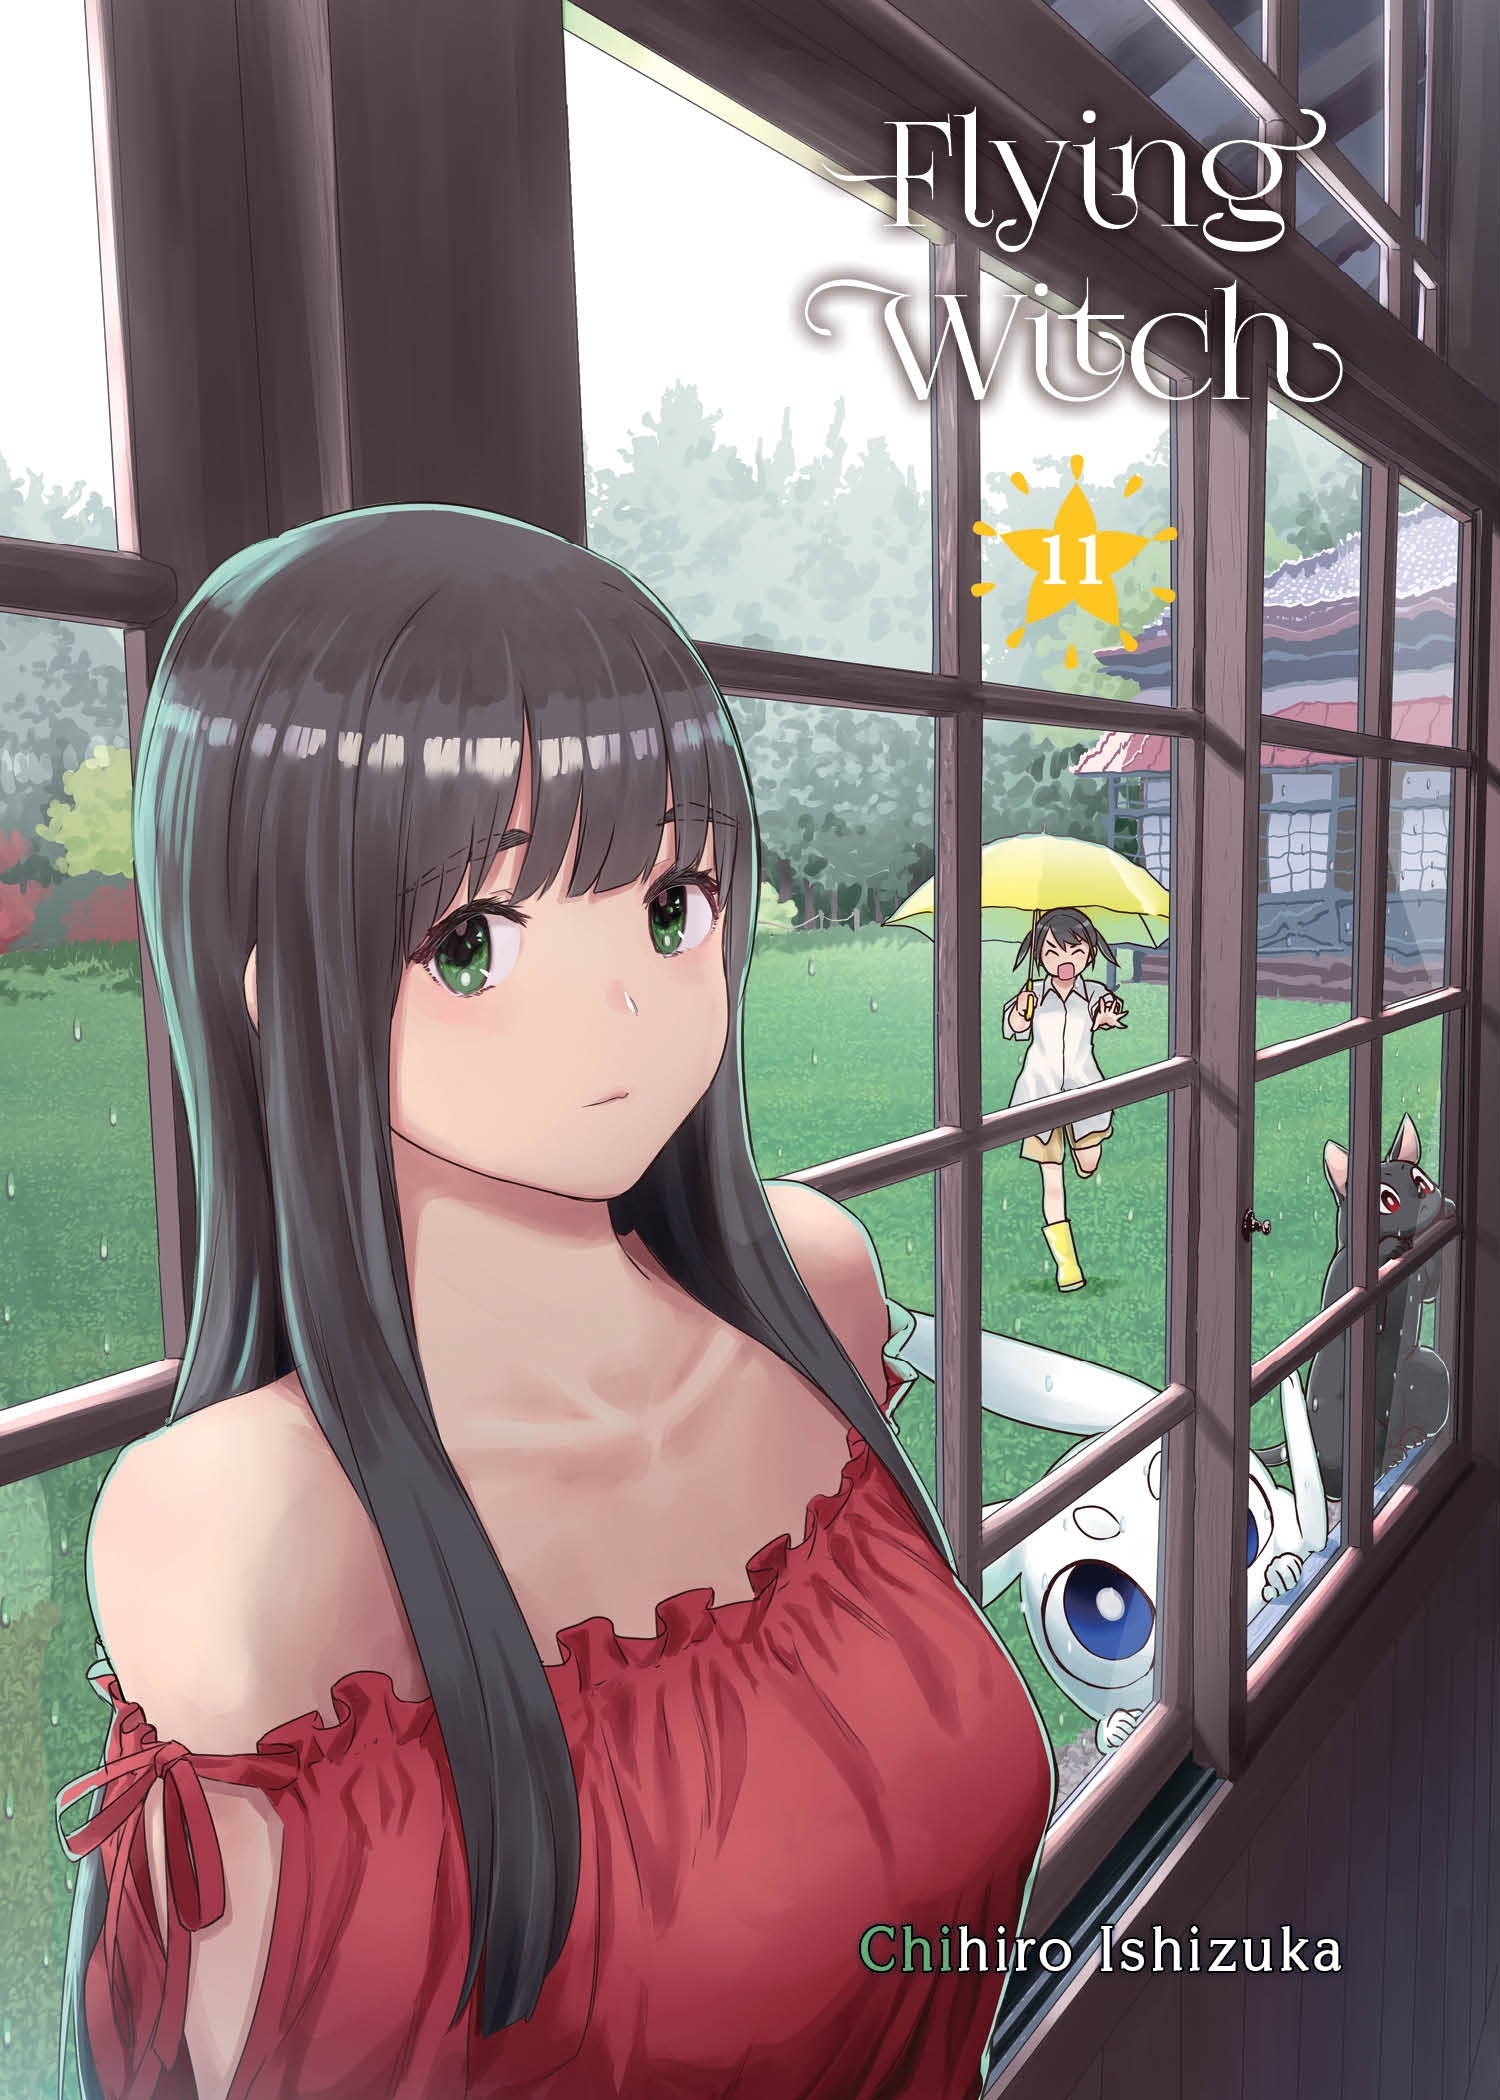 Flying Witch, Vol. 11